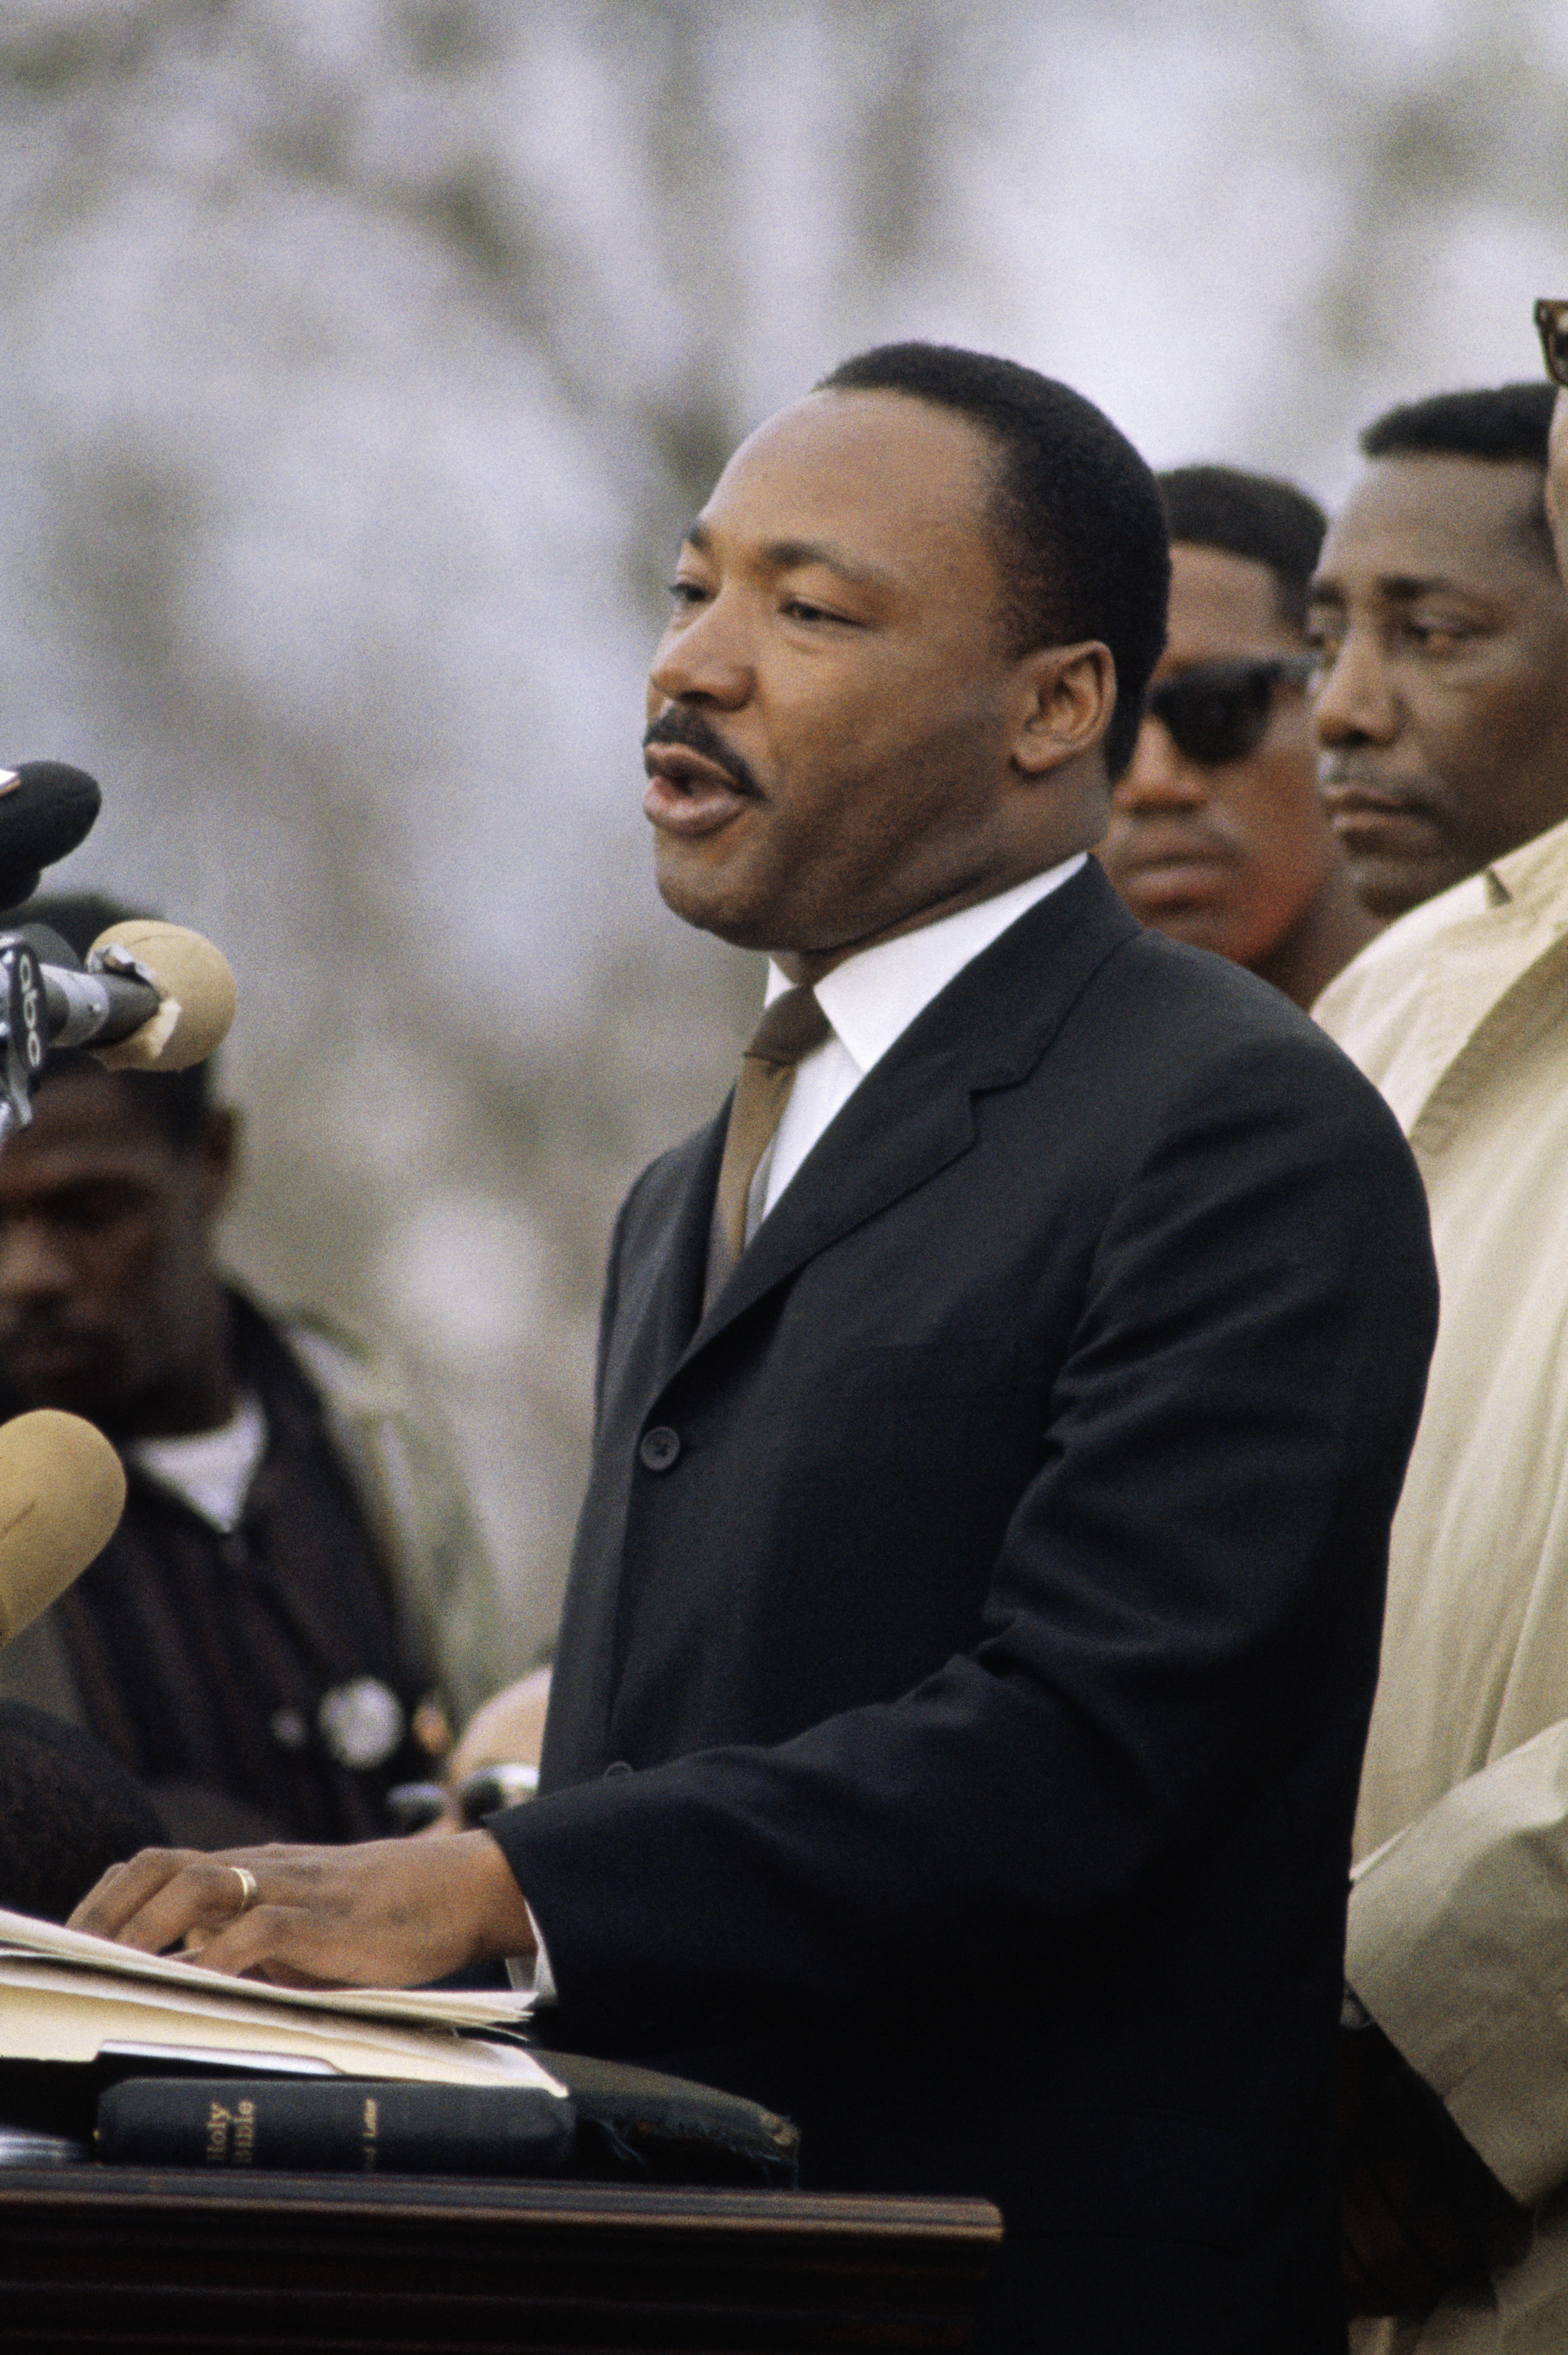 Closeup of Martin Luther King Jr. at a podium speaking